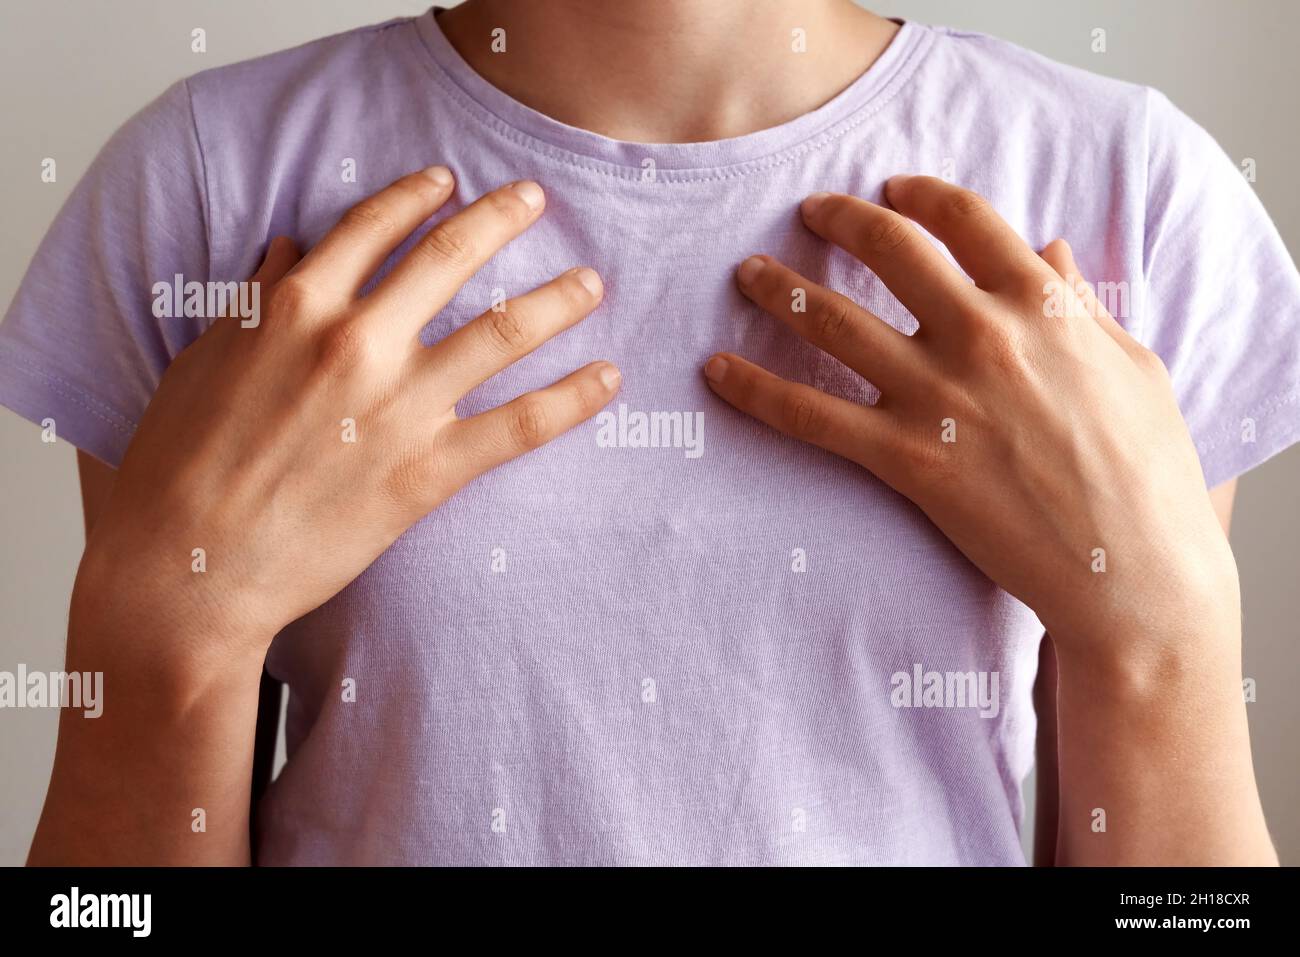 Teenage girl practicing EFT or emotional freedom technique,  tapping on the collarbone point Stock Photo